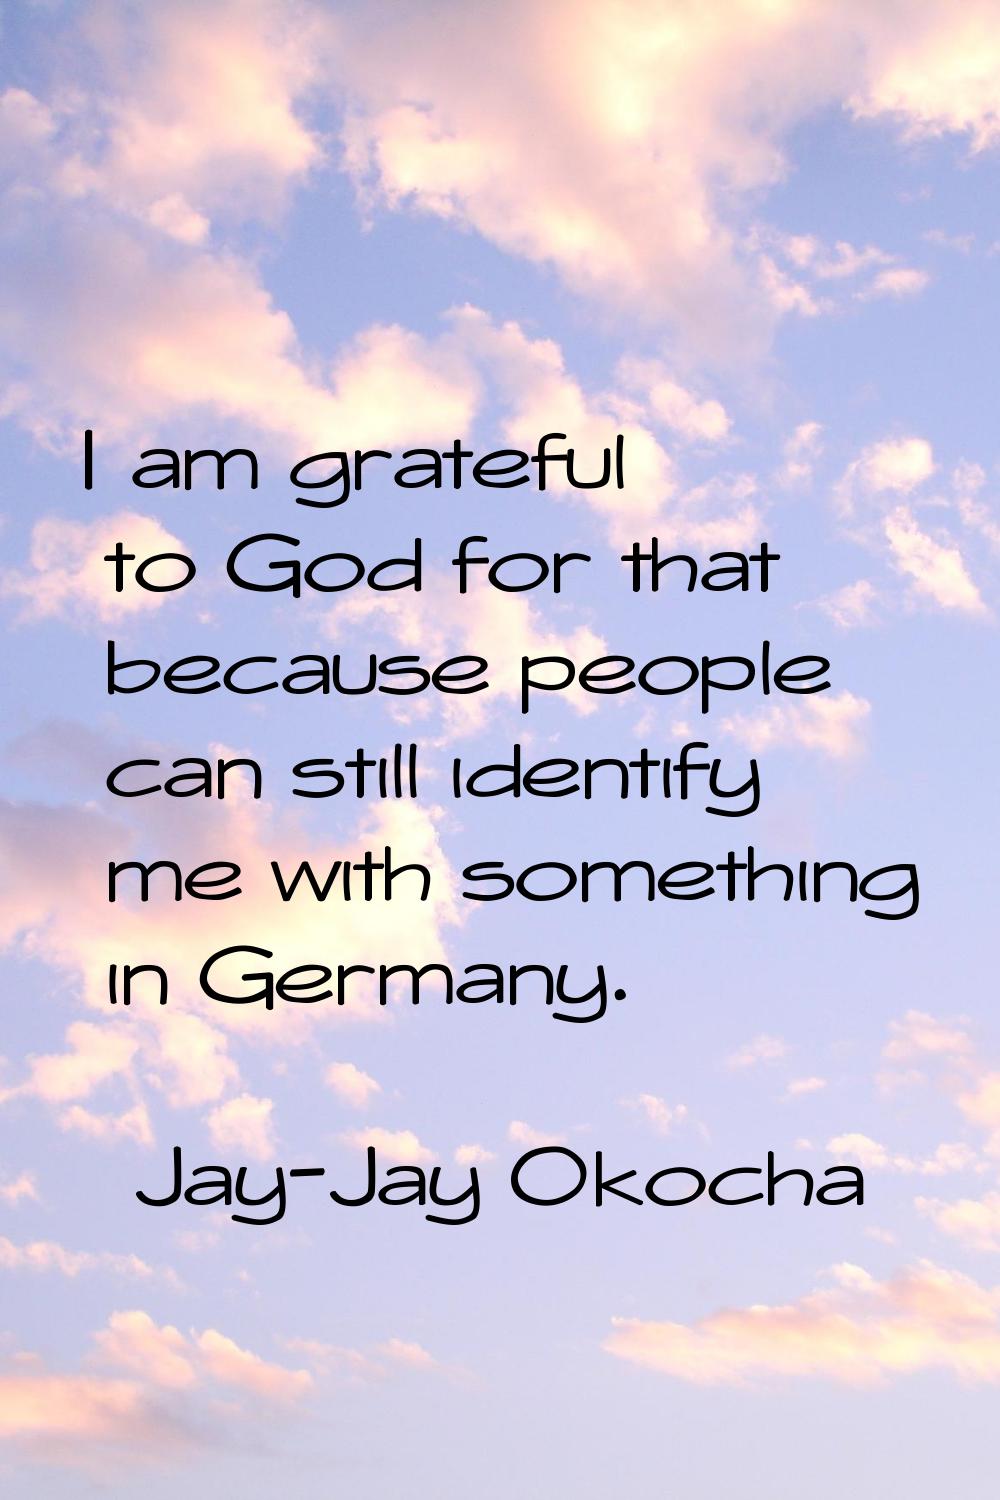 I am grateful to God for that because people can still identify me with something in Germany.